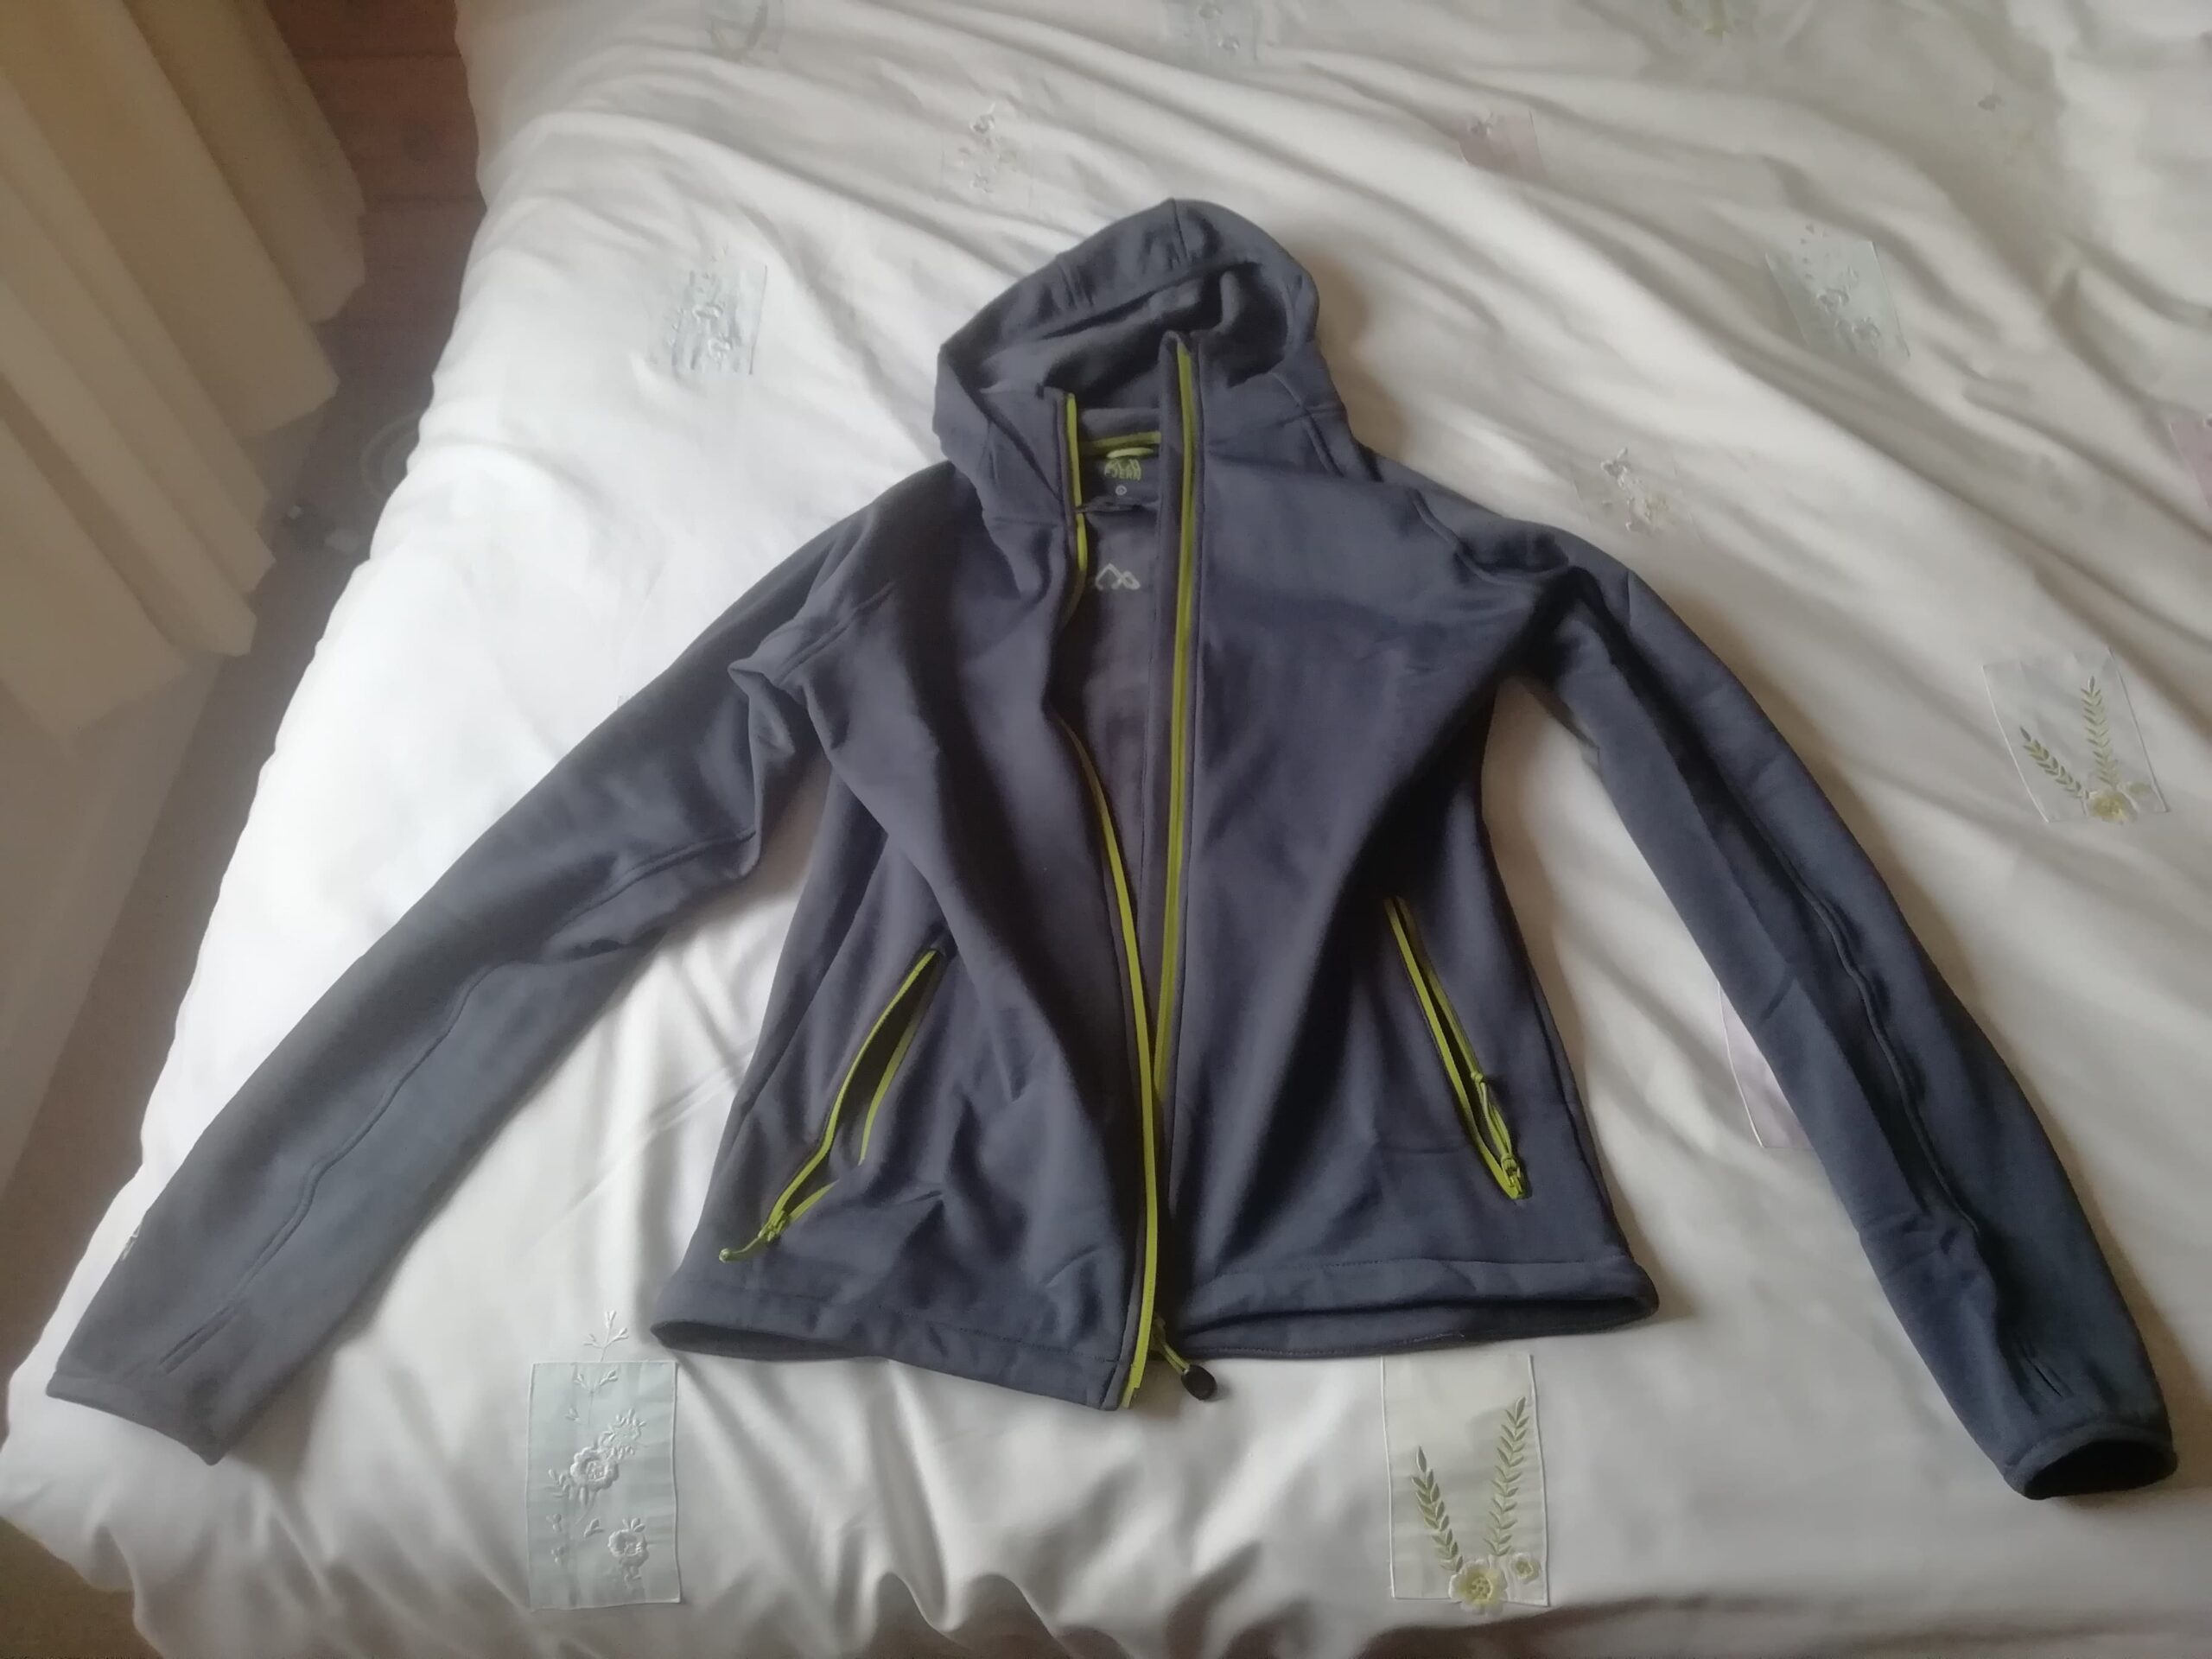 Kit Review- Fjern Vandring Hoodie - Come Walk With Me